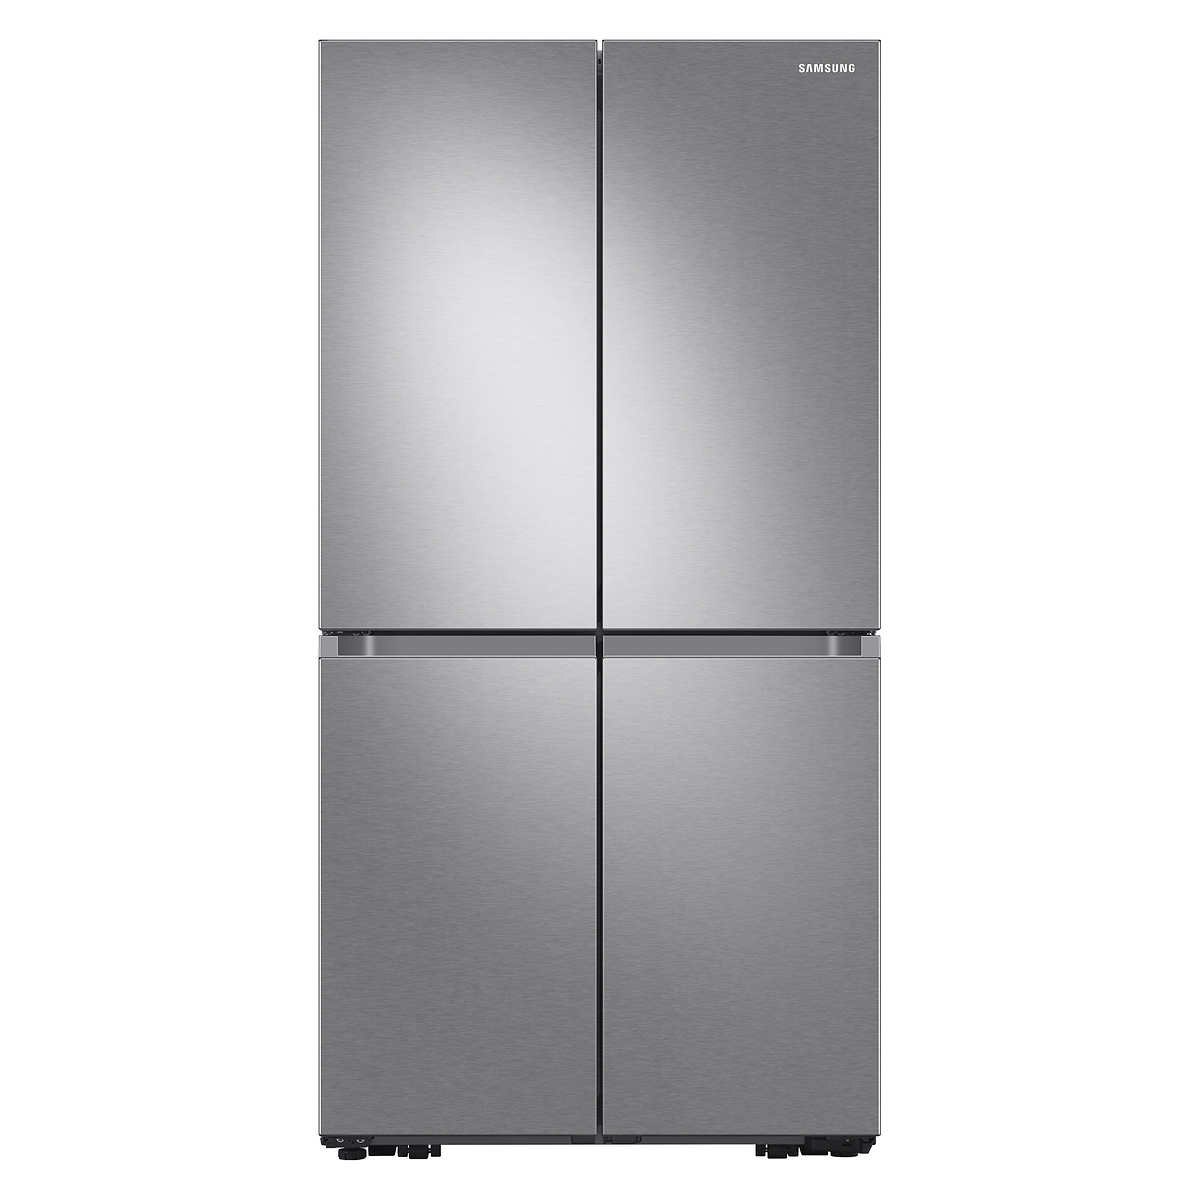 Samsung 29 cu. ft. Smart 4-Door Flex Refrigerator with AutoFill Water Pitcher and Dual Ice Maker $1599.99